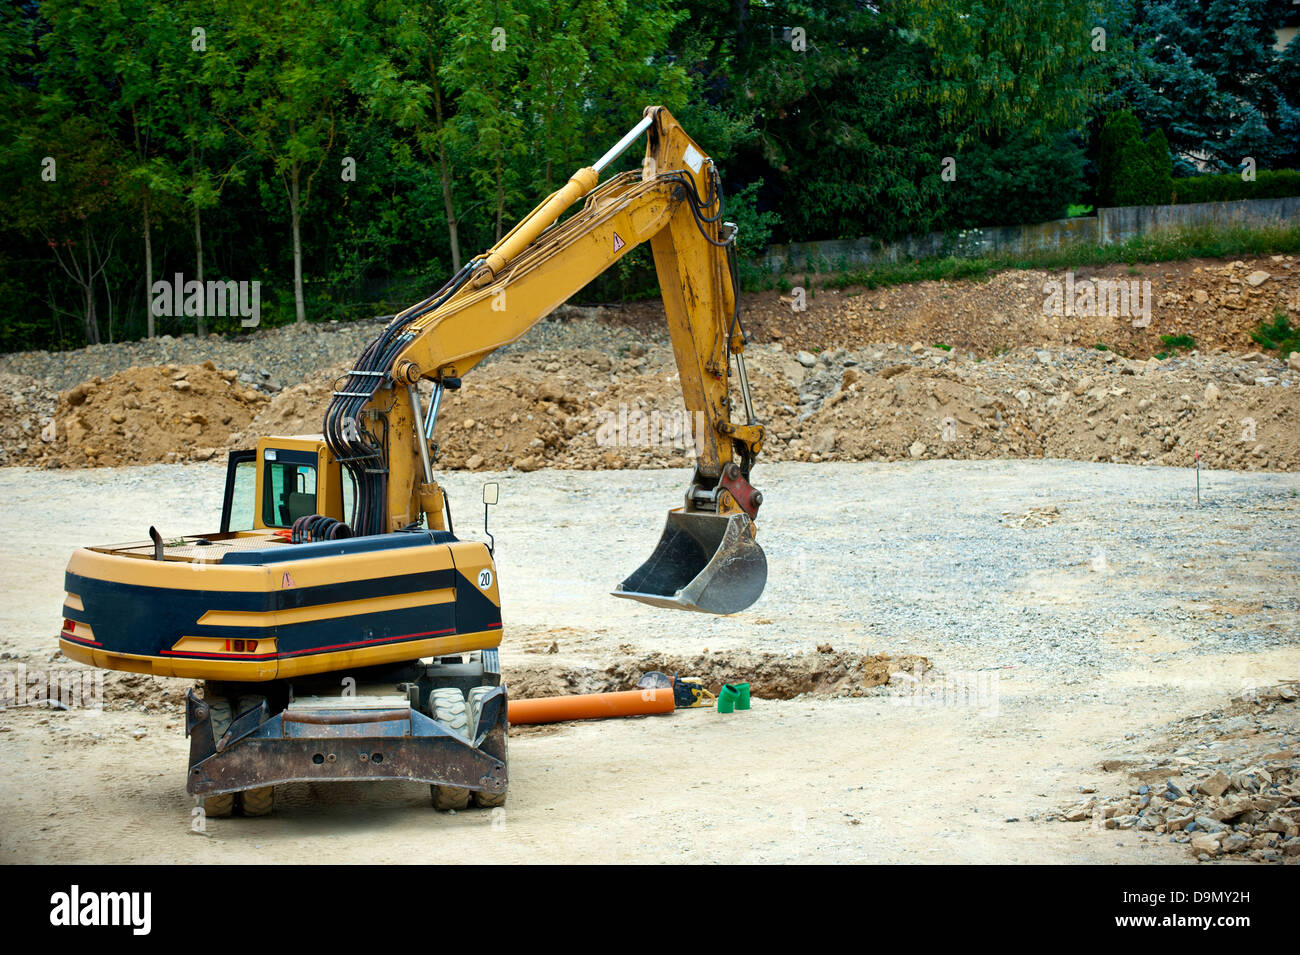 Development works in a new building area Stock Photo